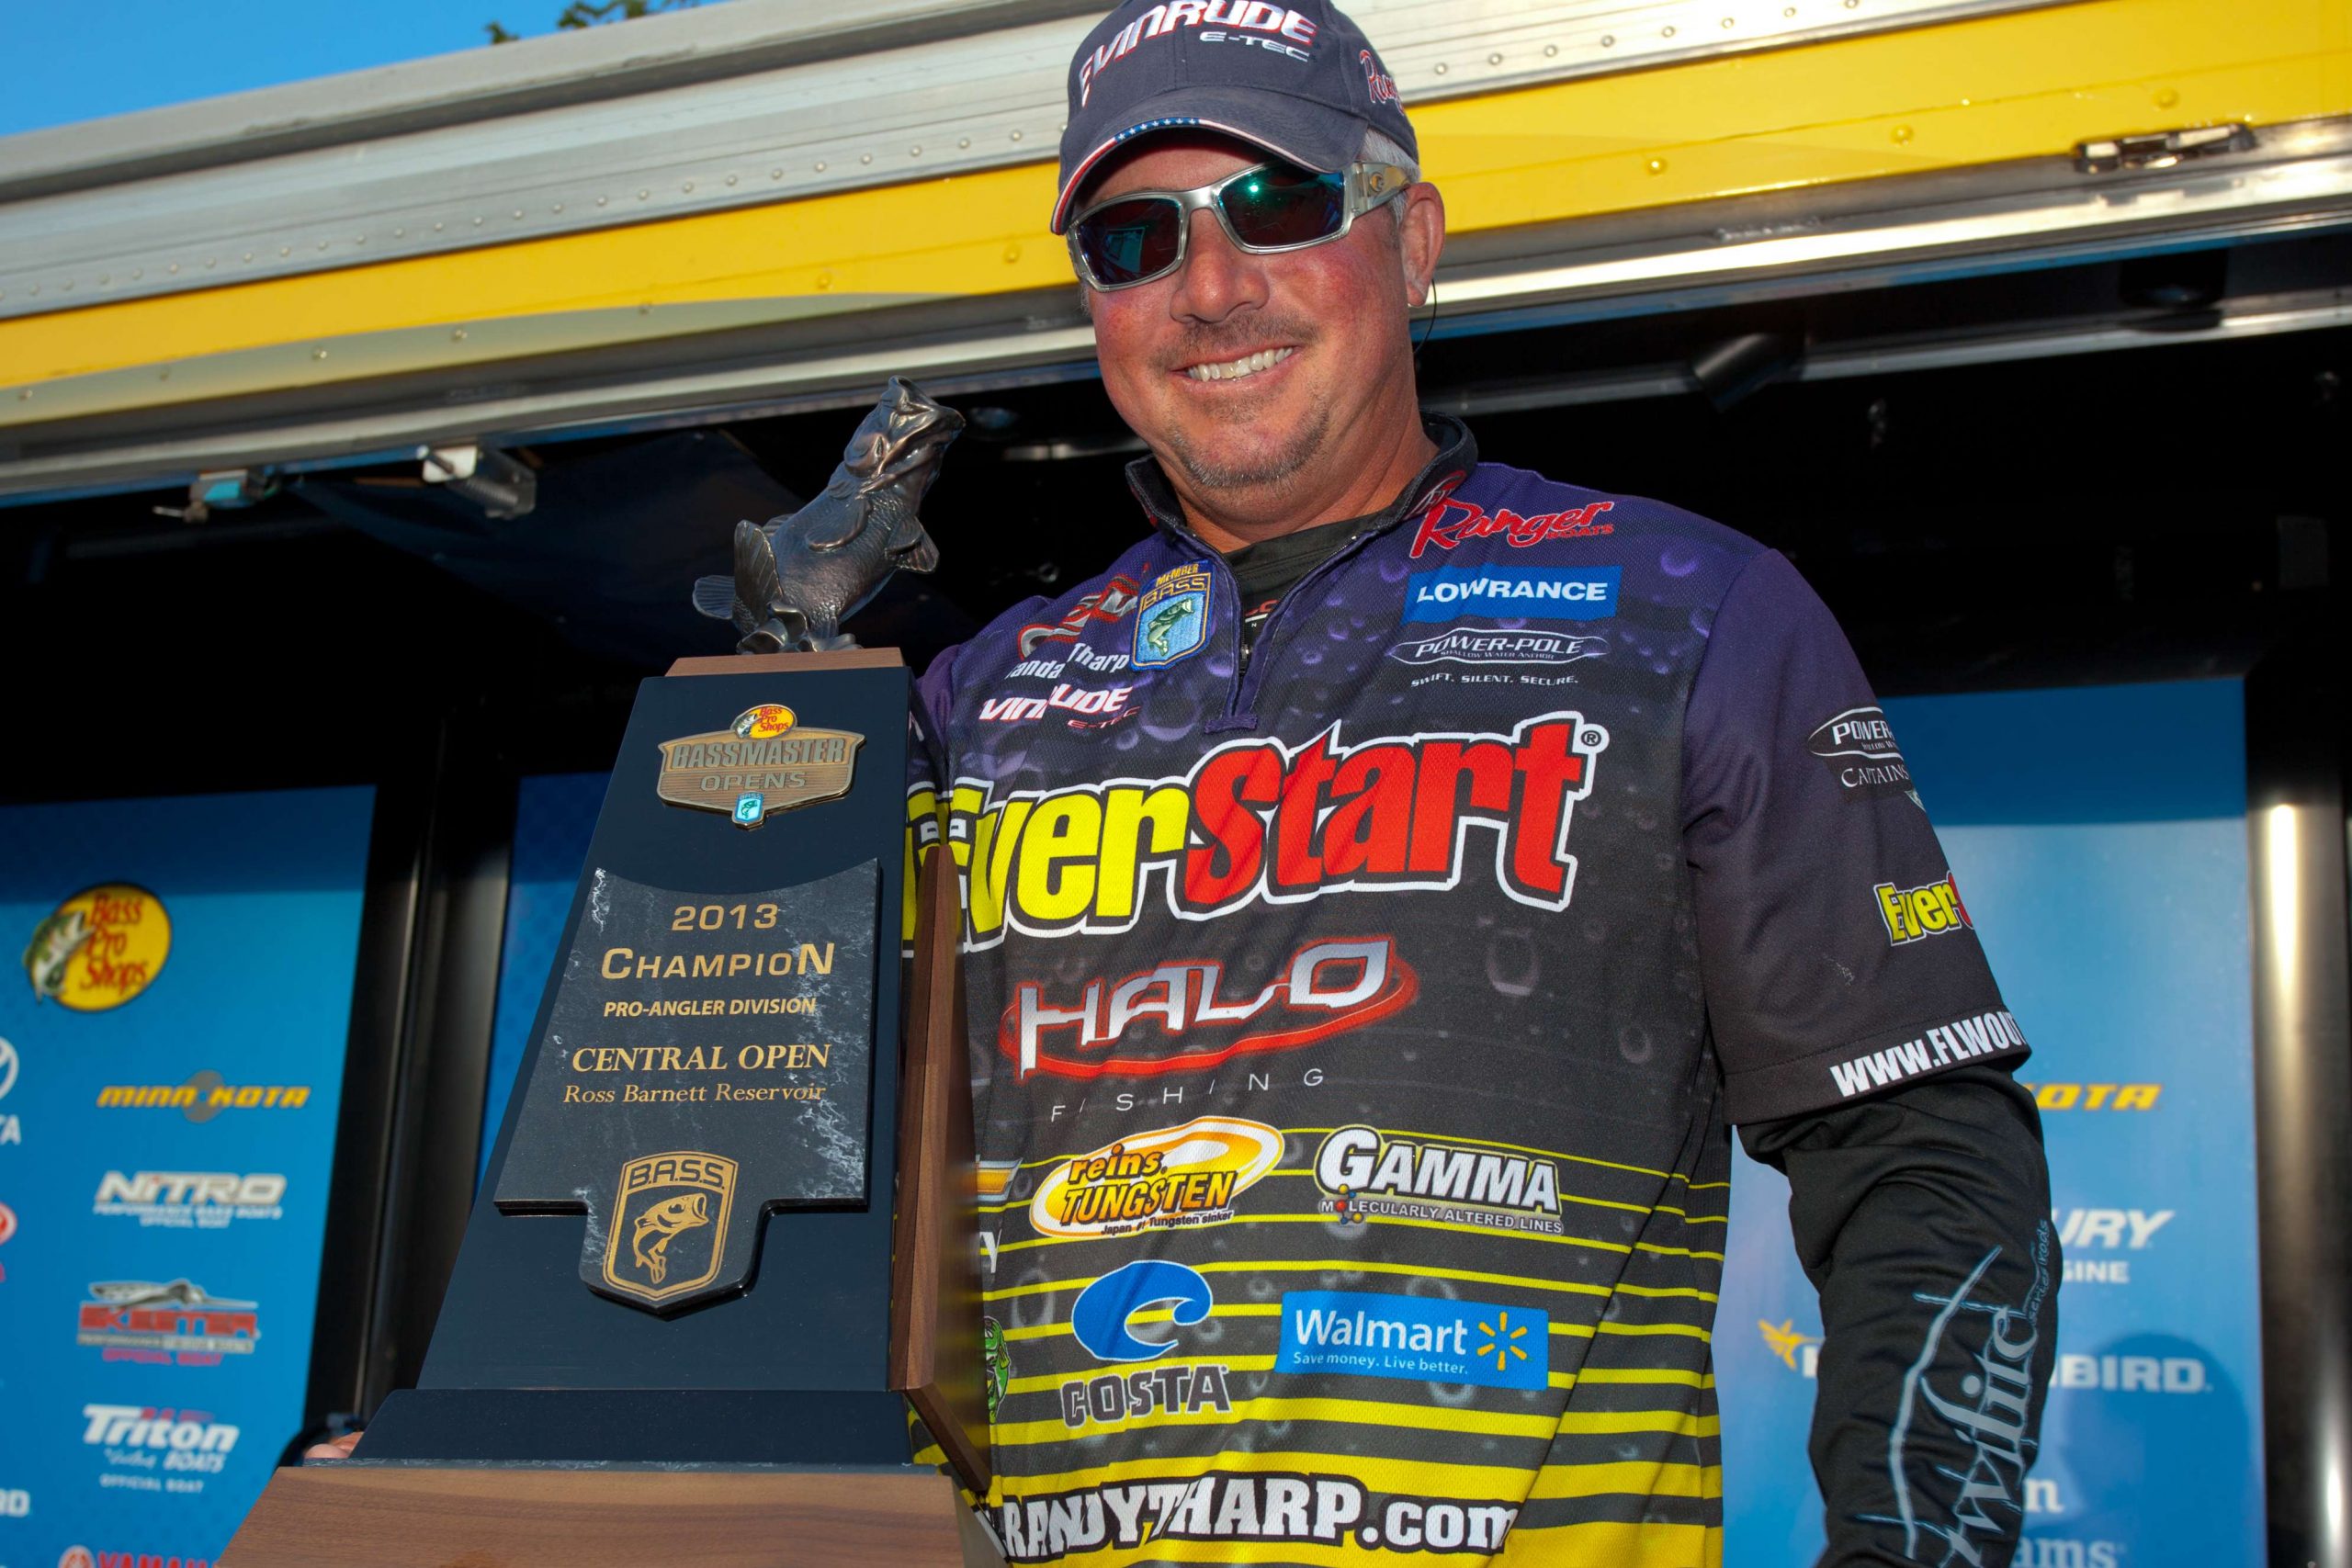 Like Randall Tharp (who won his first Elite Series event in 2016). It was a win here at the Southern Open in 2013 that allowed him to qualify for the Elite Series. 